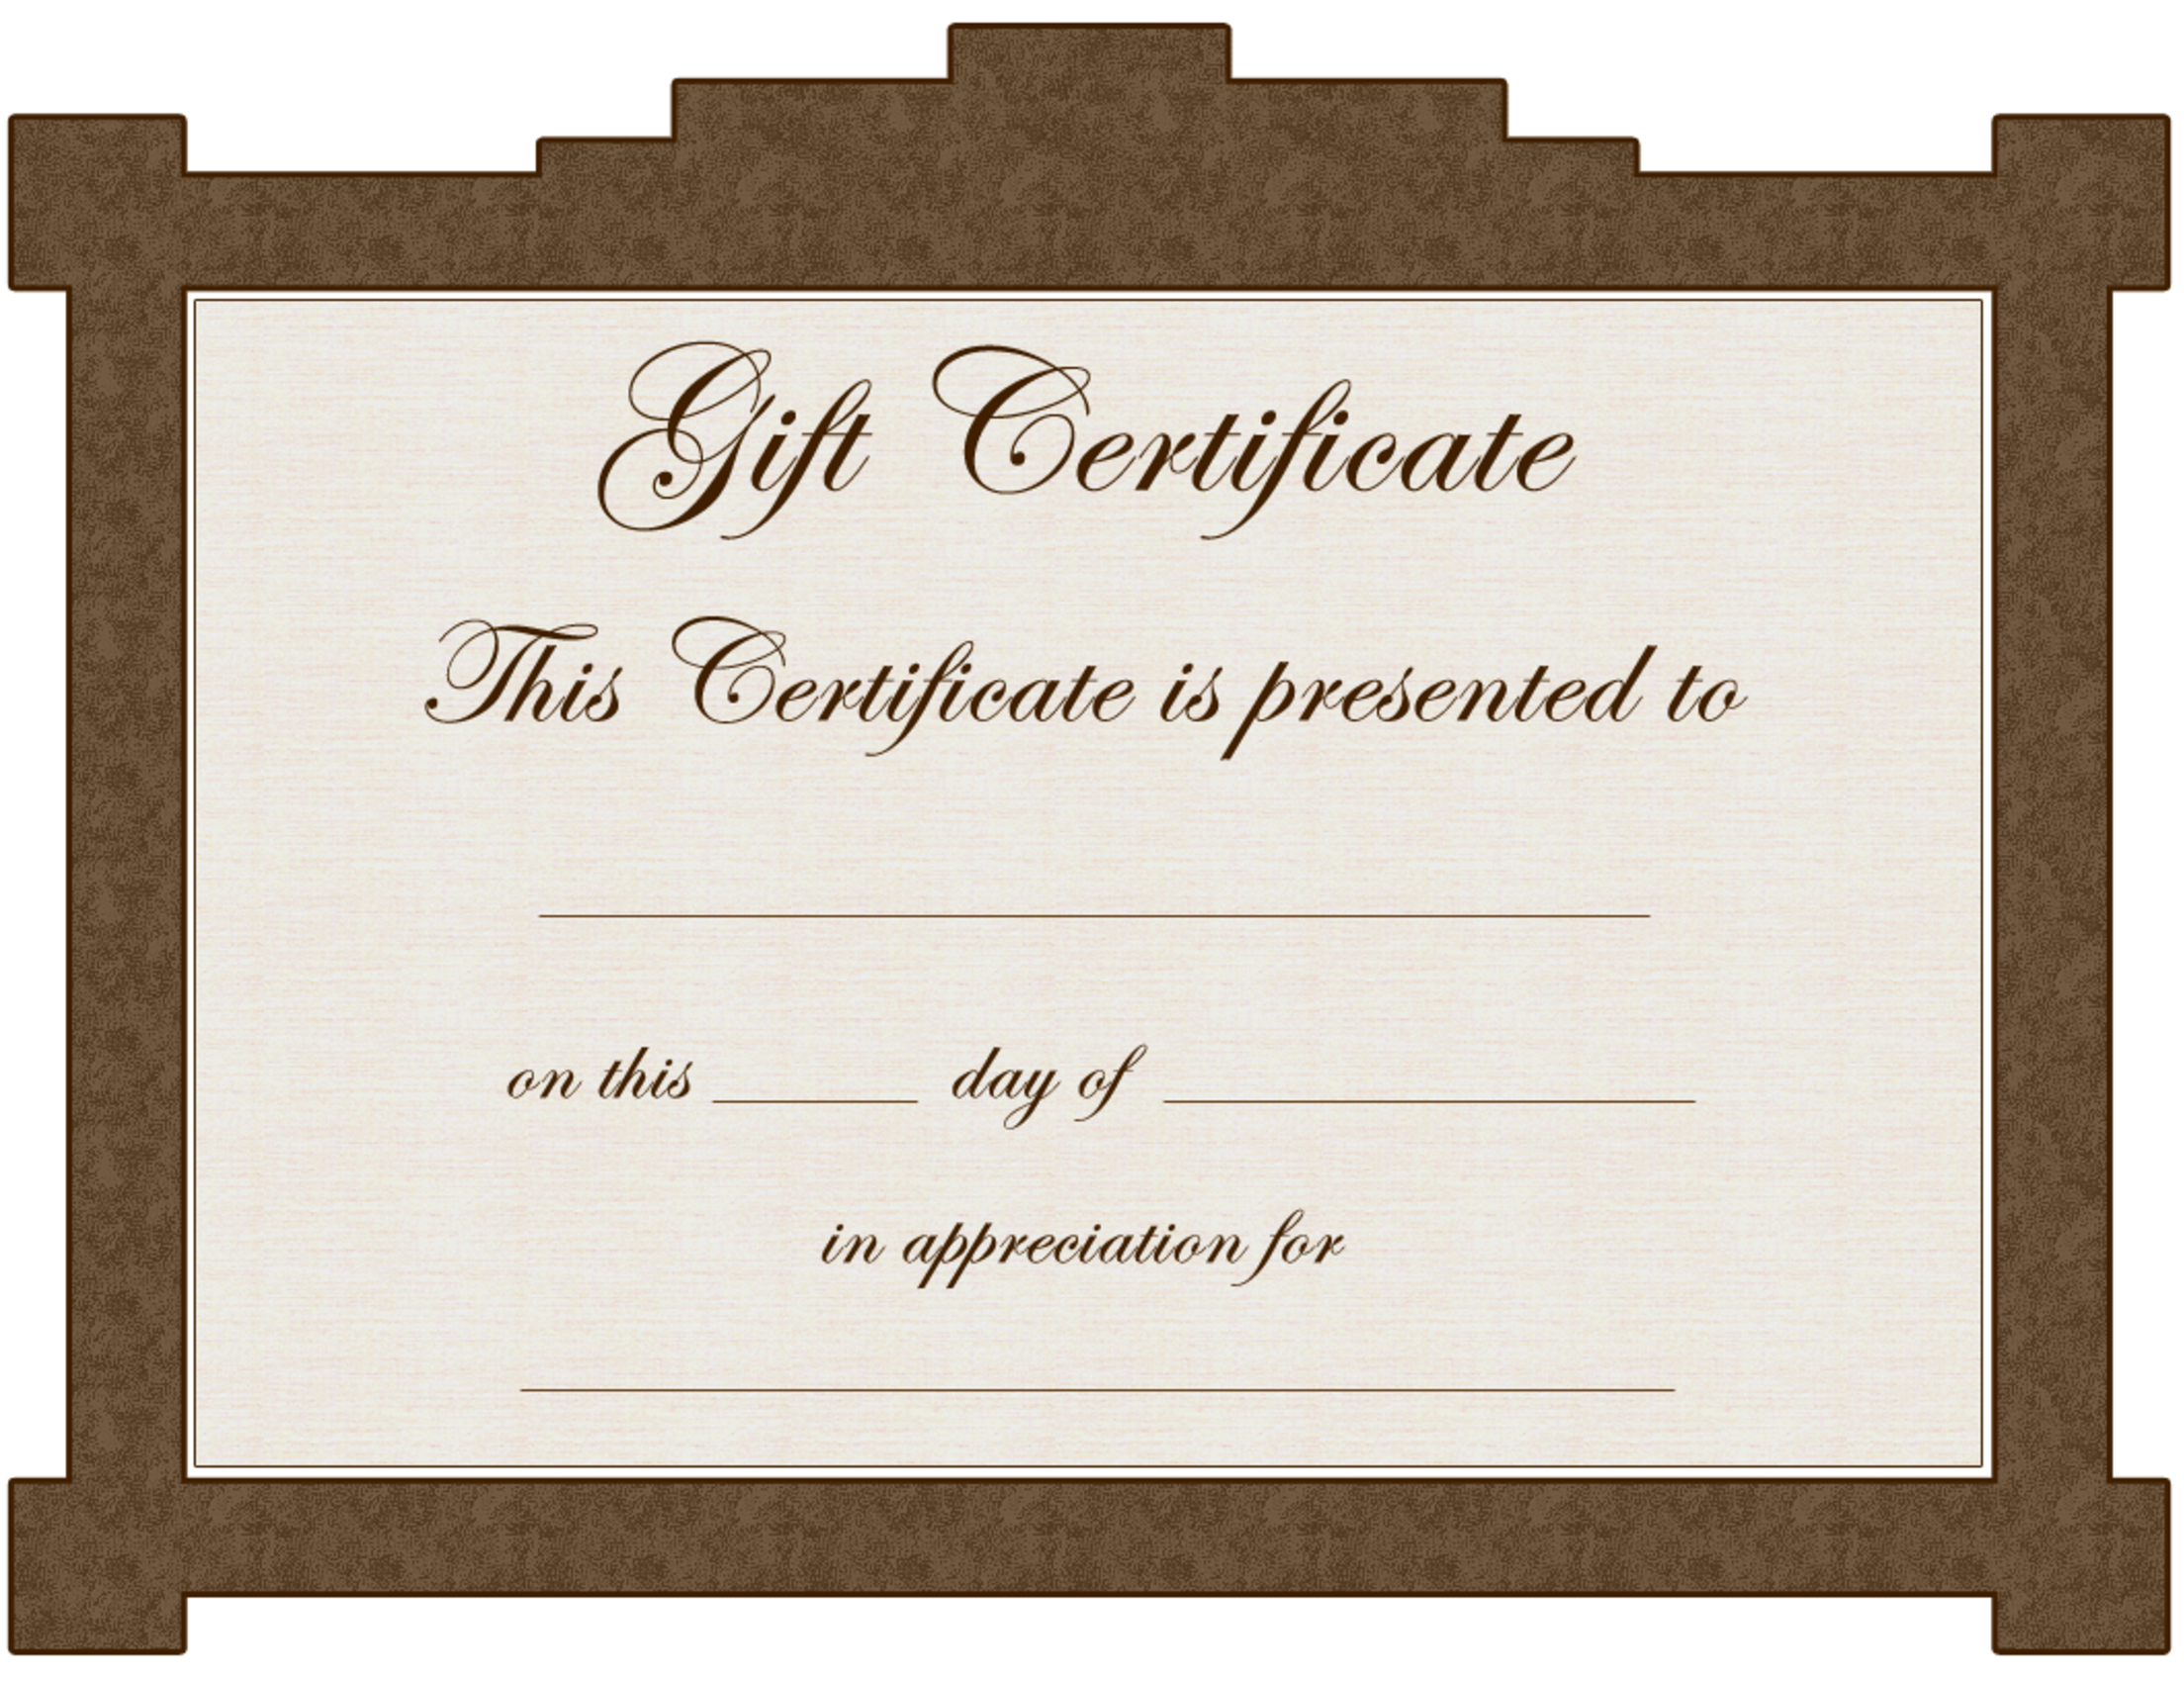 Gift Certificate Templates To Print | Activity Shelter Throughout Present Certificate Templates